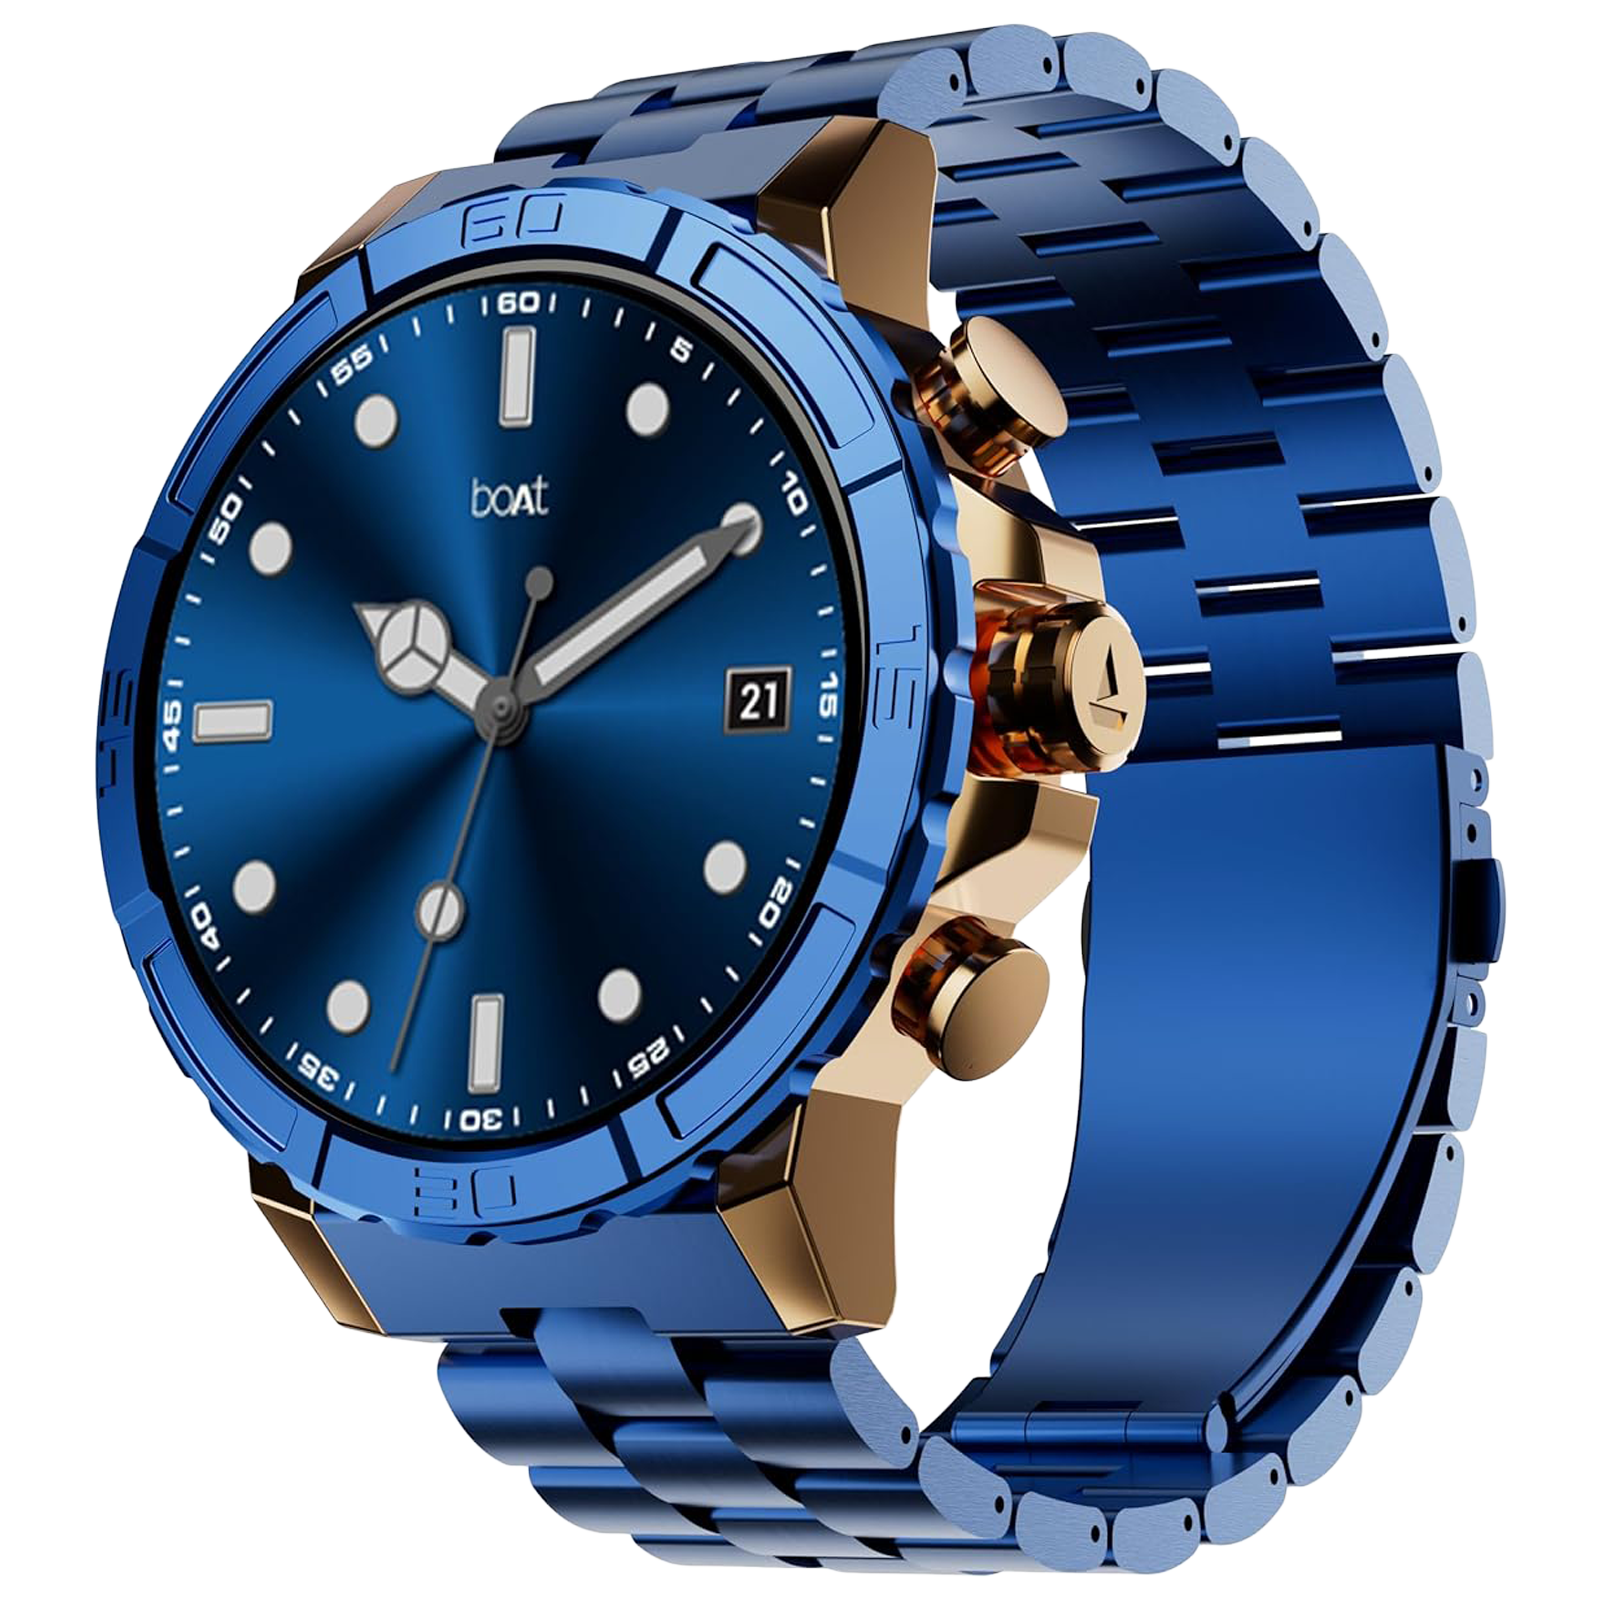 boAt Enigma X700 Smartwatch with Bluetooth Calling (38mm AMOLED Display, IP67 Sweat Resistant, Copper Blue Strap)